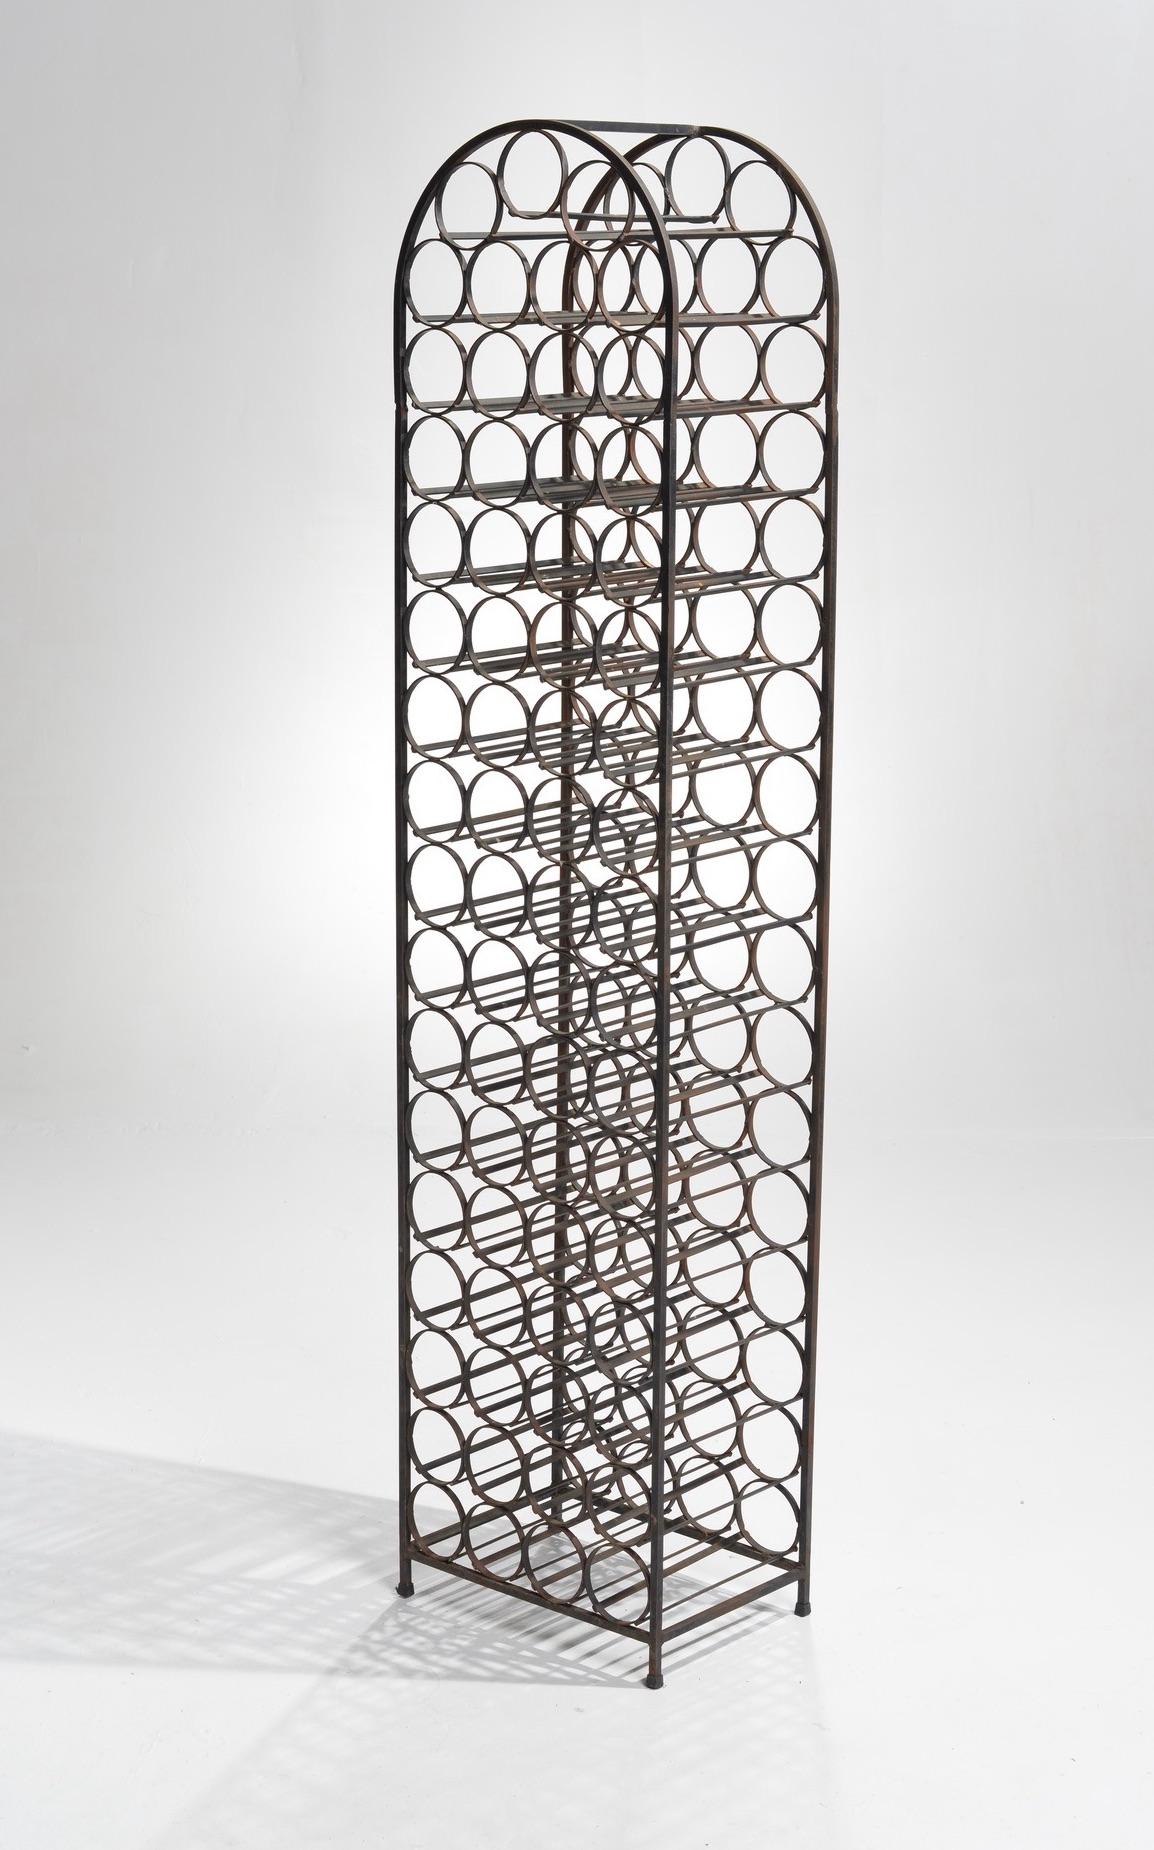 Dome top wrought iron wine rack designed by Arthur Umanoff in the early 1960s. A staple in Mid-Century Modern design.